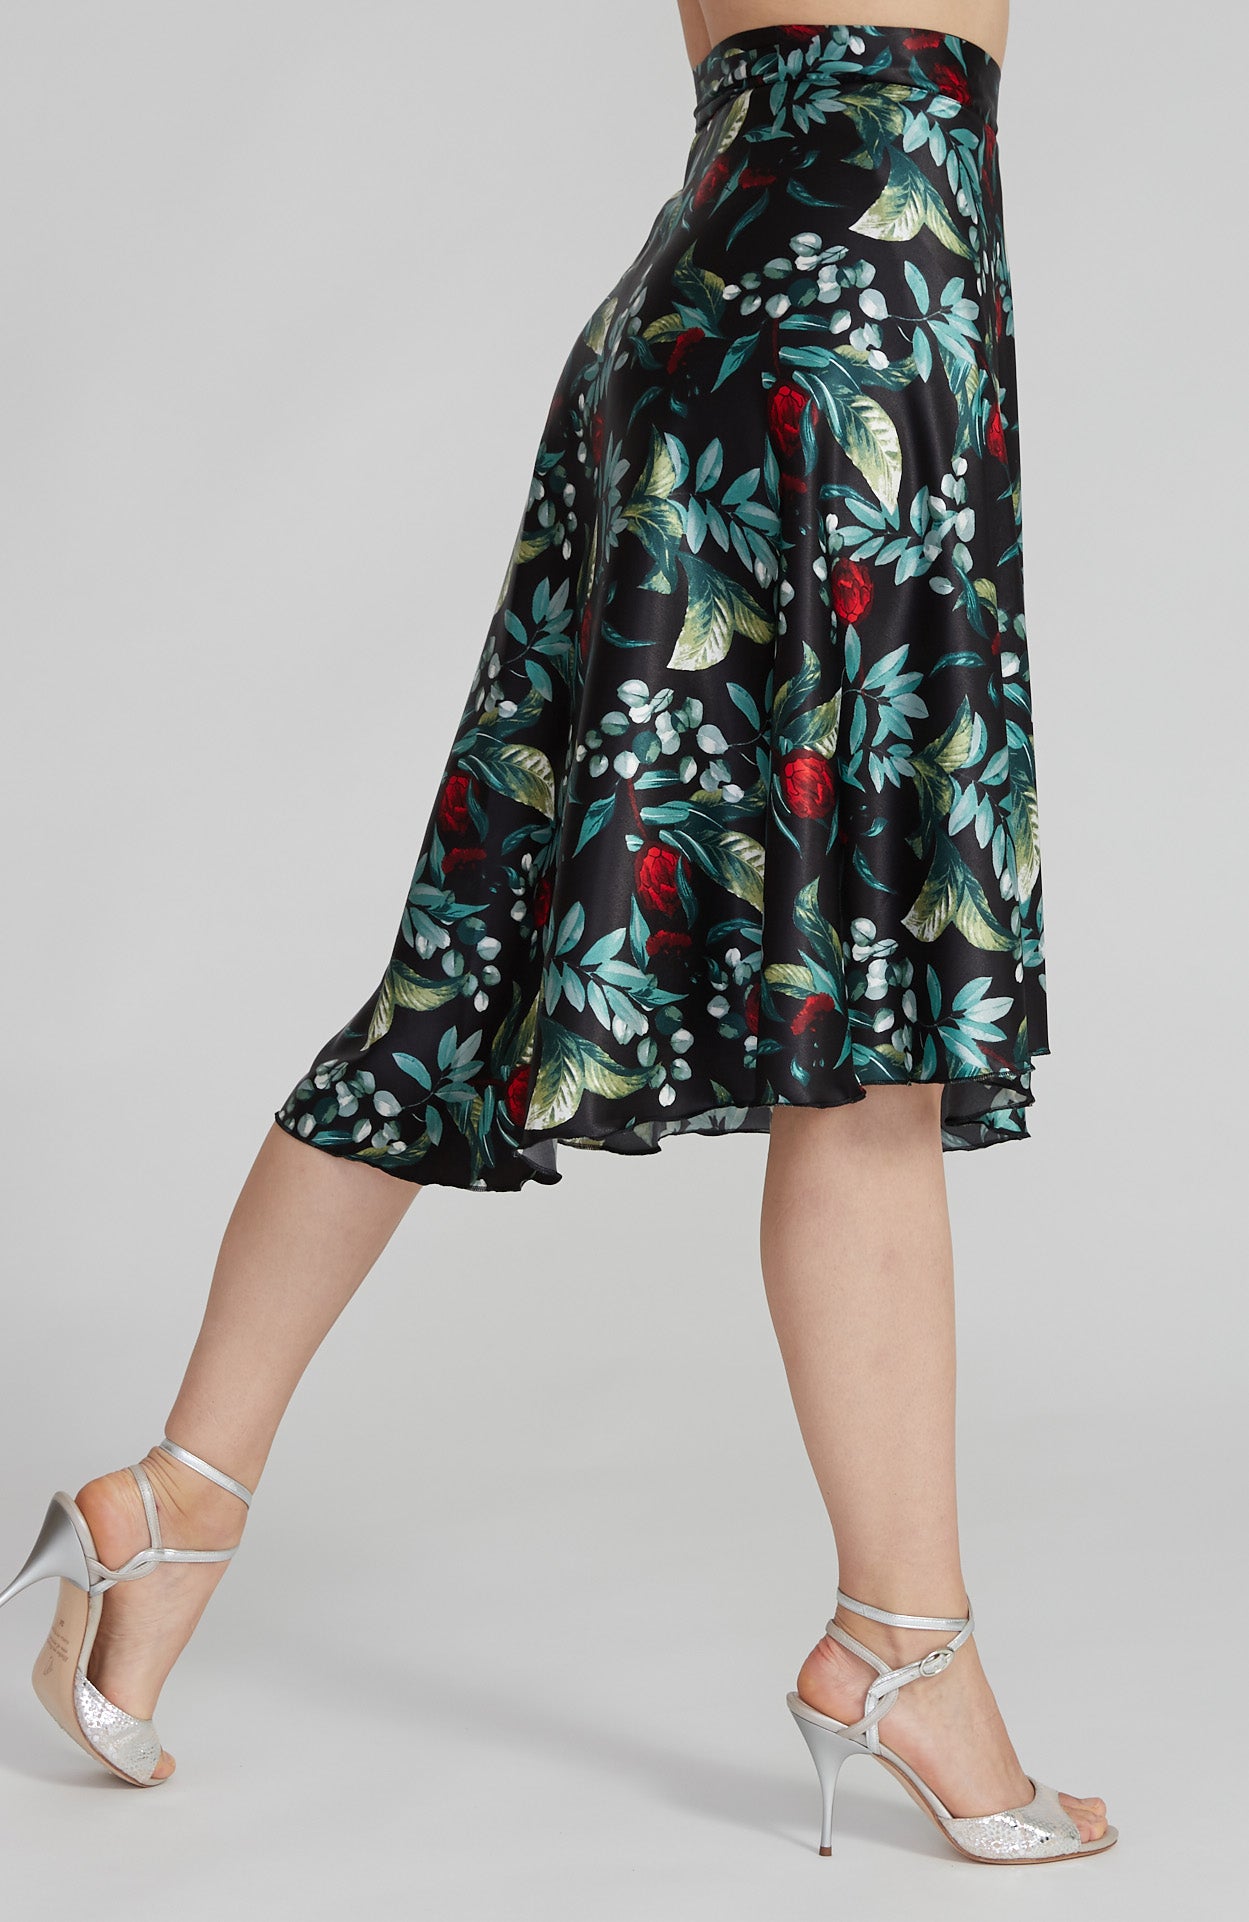 COCO - Wrap Skirt in Satin Florals